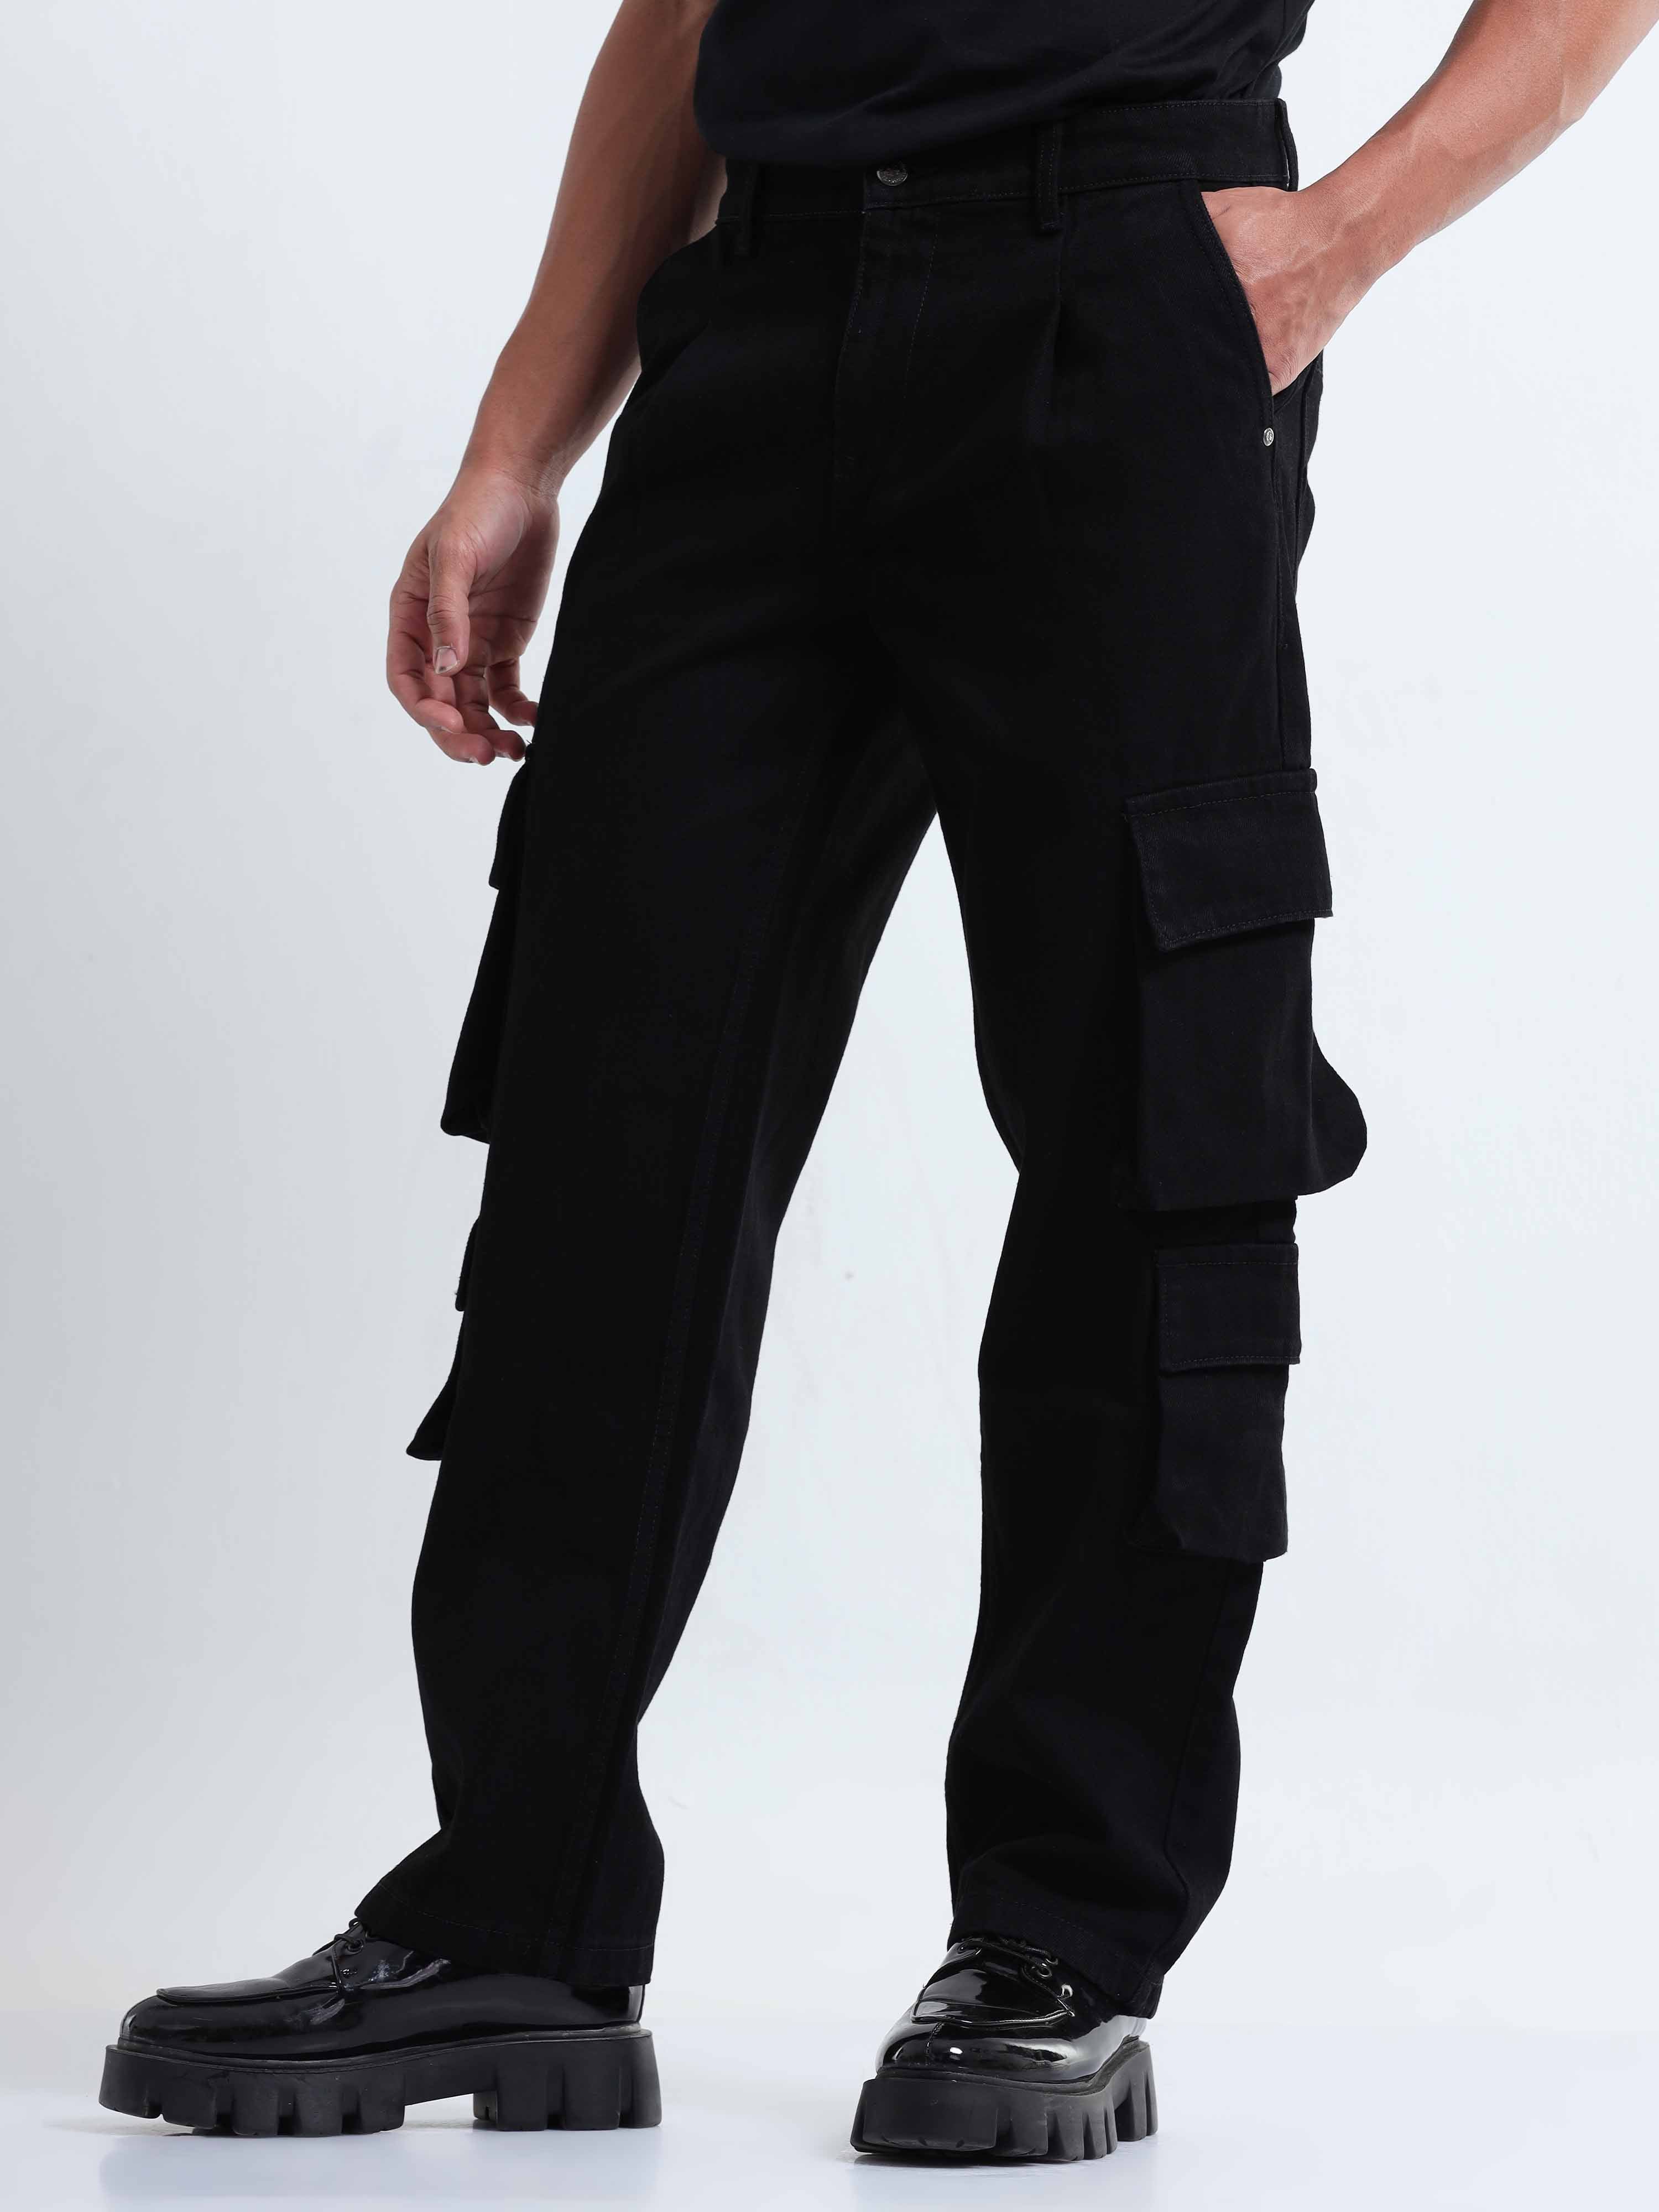 Buy Dockers Mens Relaxed Fit Cargo Pants Online India | Ubuy